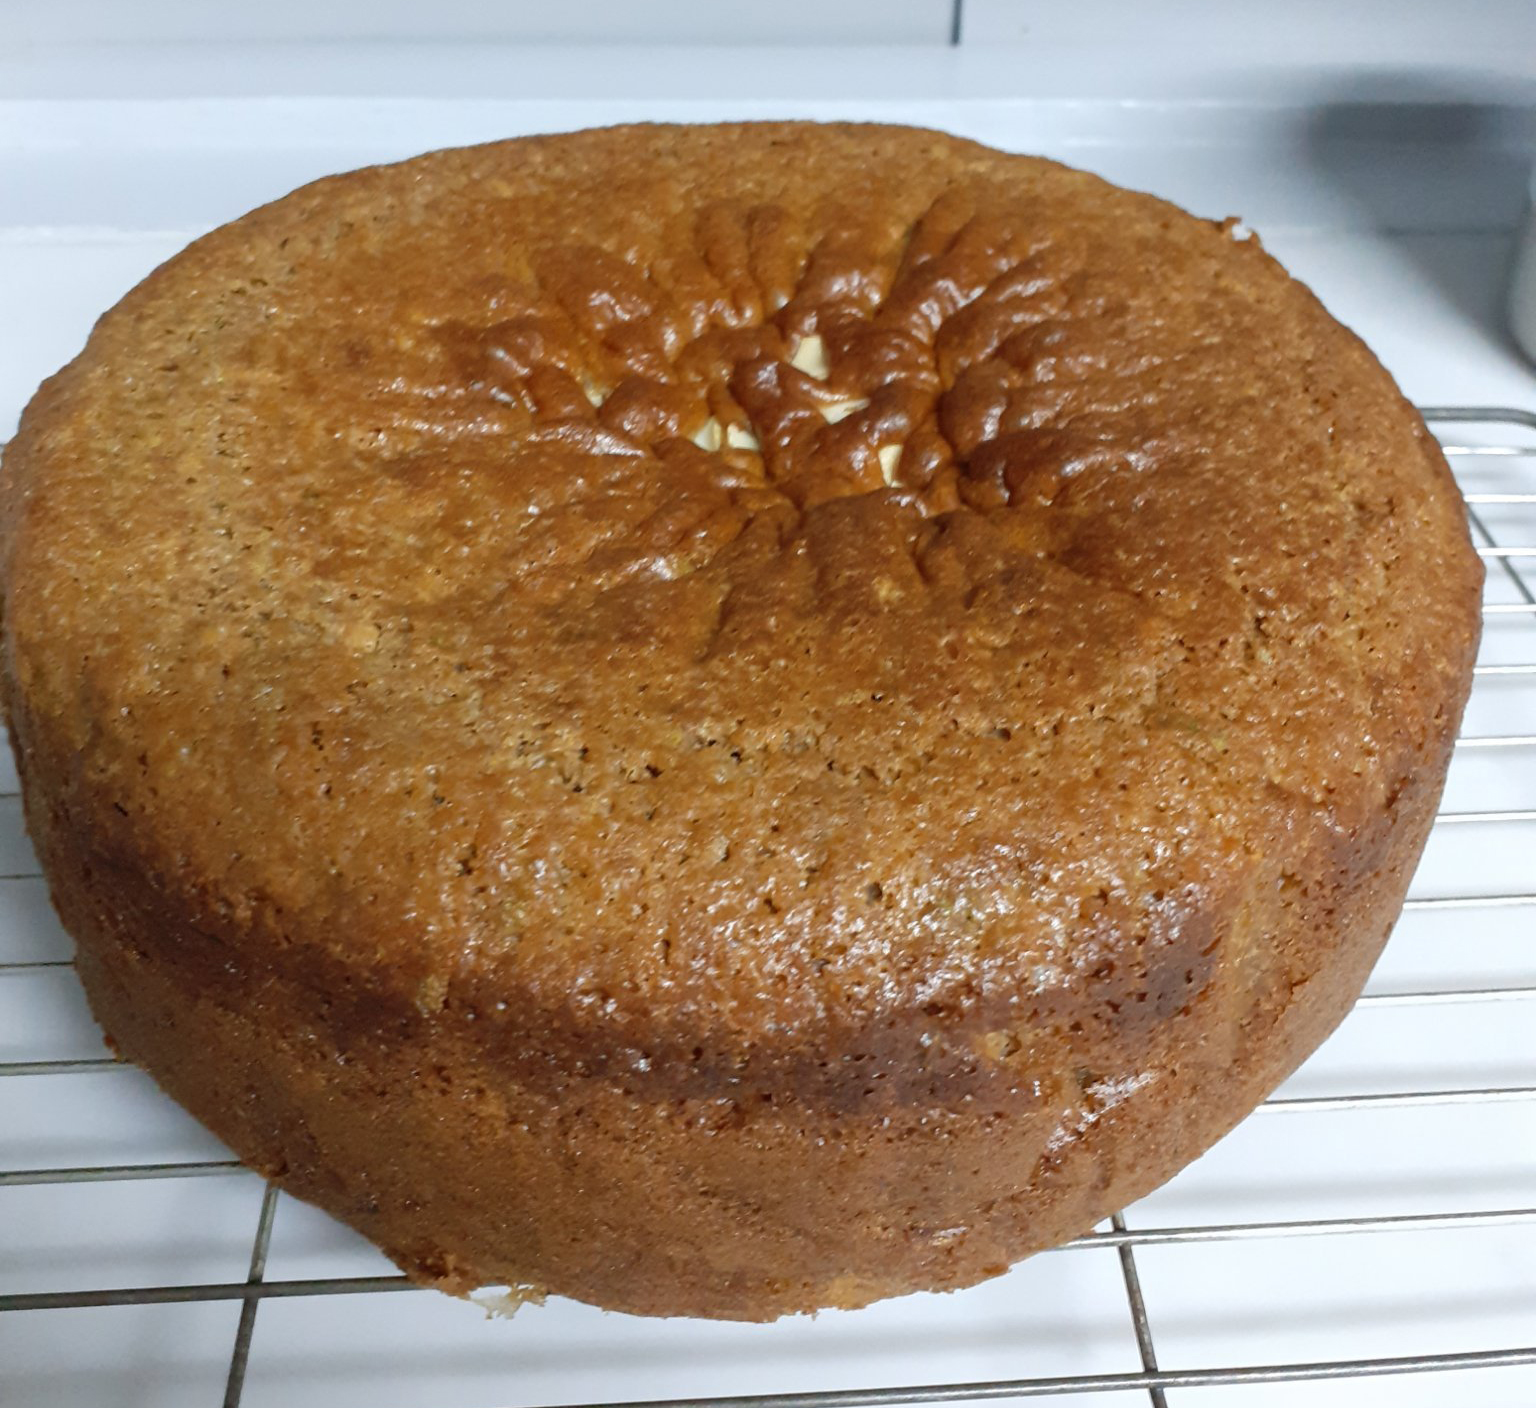 Golden brown cake with sprinkling of nuts on top, on wire cooling tray - on white worktop and blue background